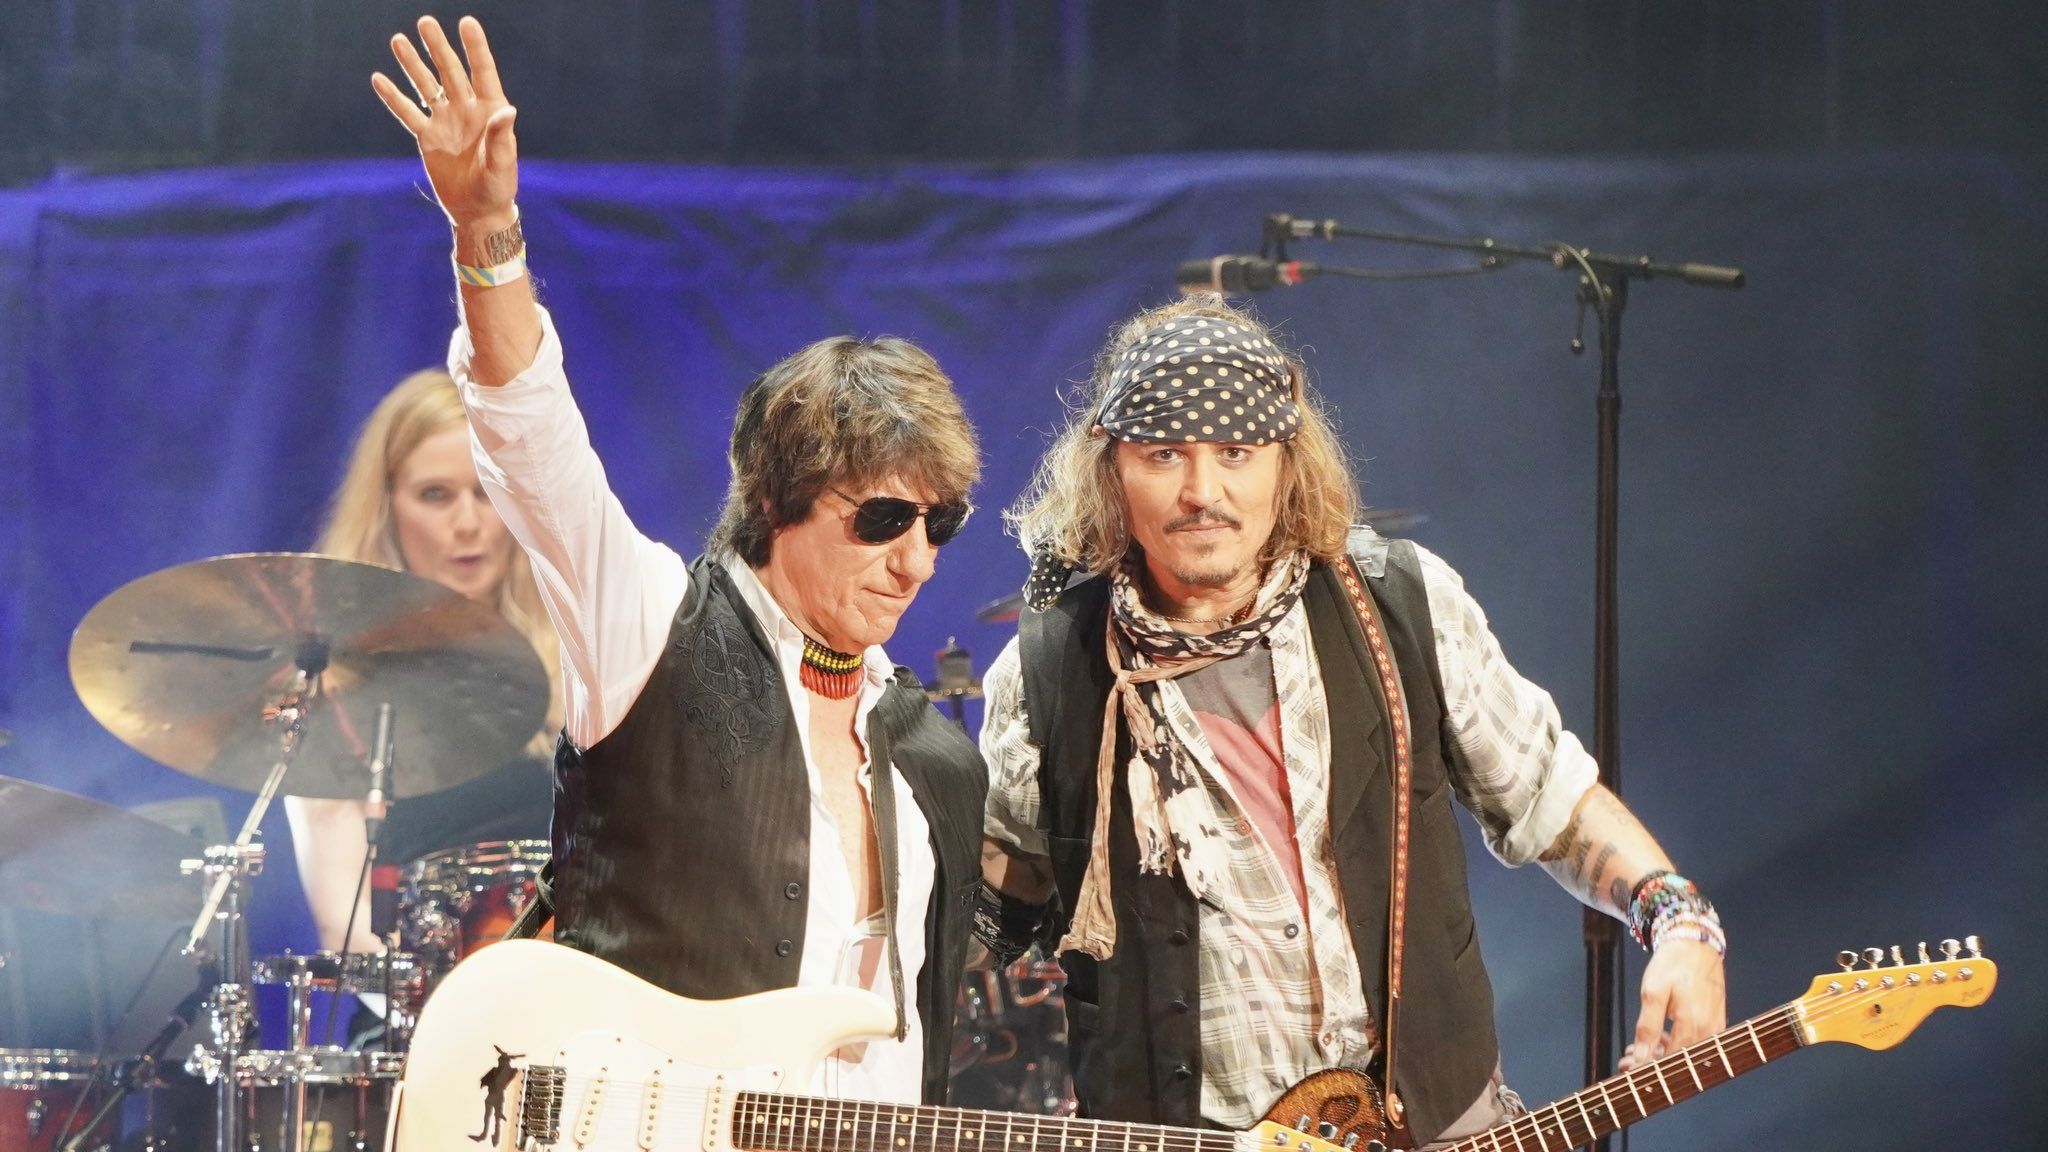 Jeff Beck and Johnny Depp